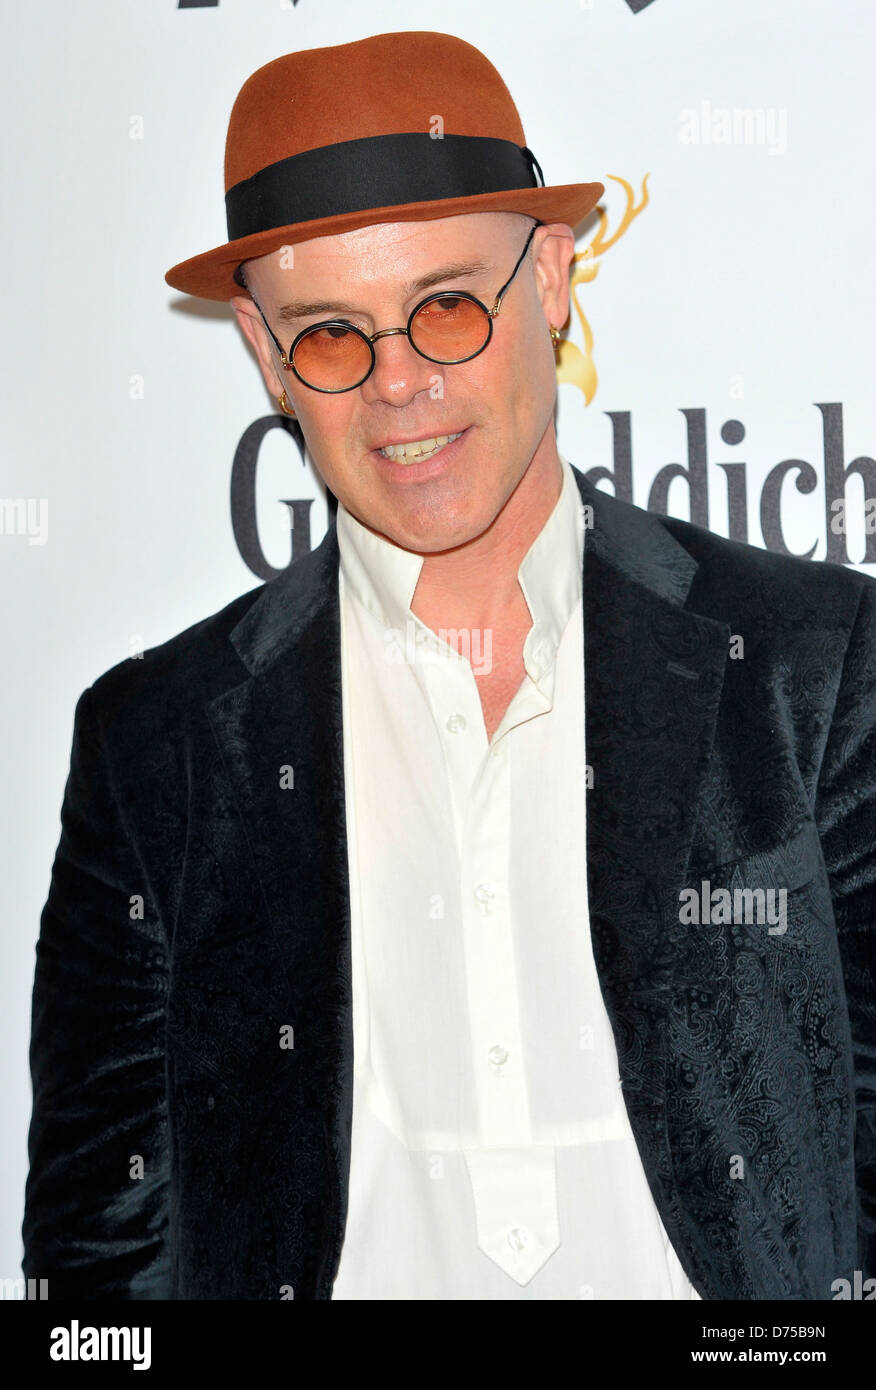 Thomas Dolby Glenfiddich Mojo Honours List 2011 Awards Ceremony, held at The Brewery - Arrivals London, England - 21.07.11 Stock Photo